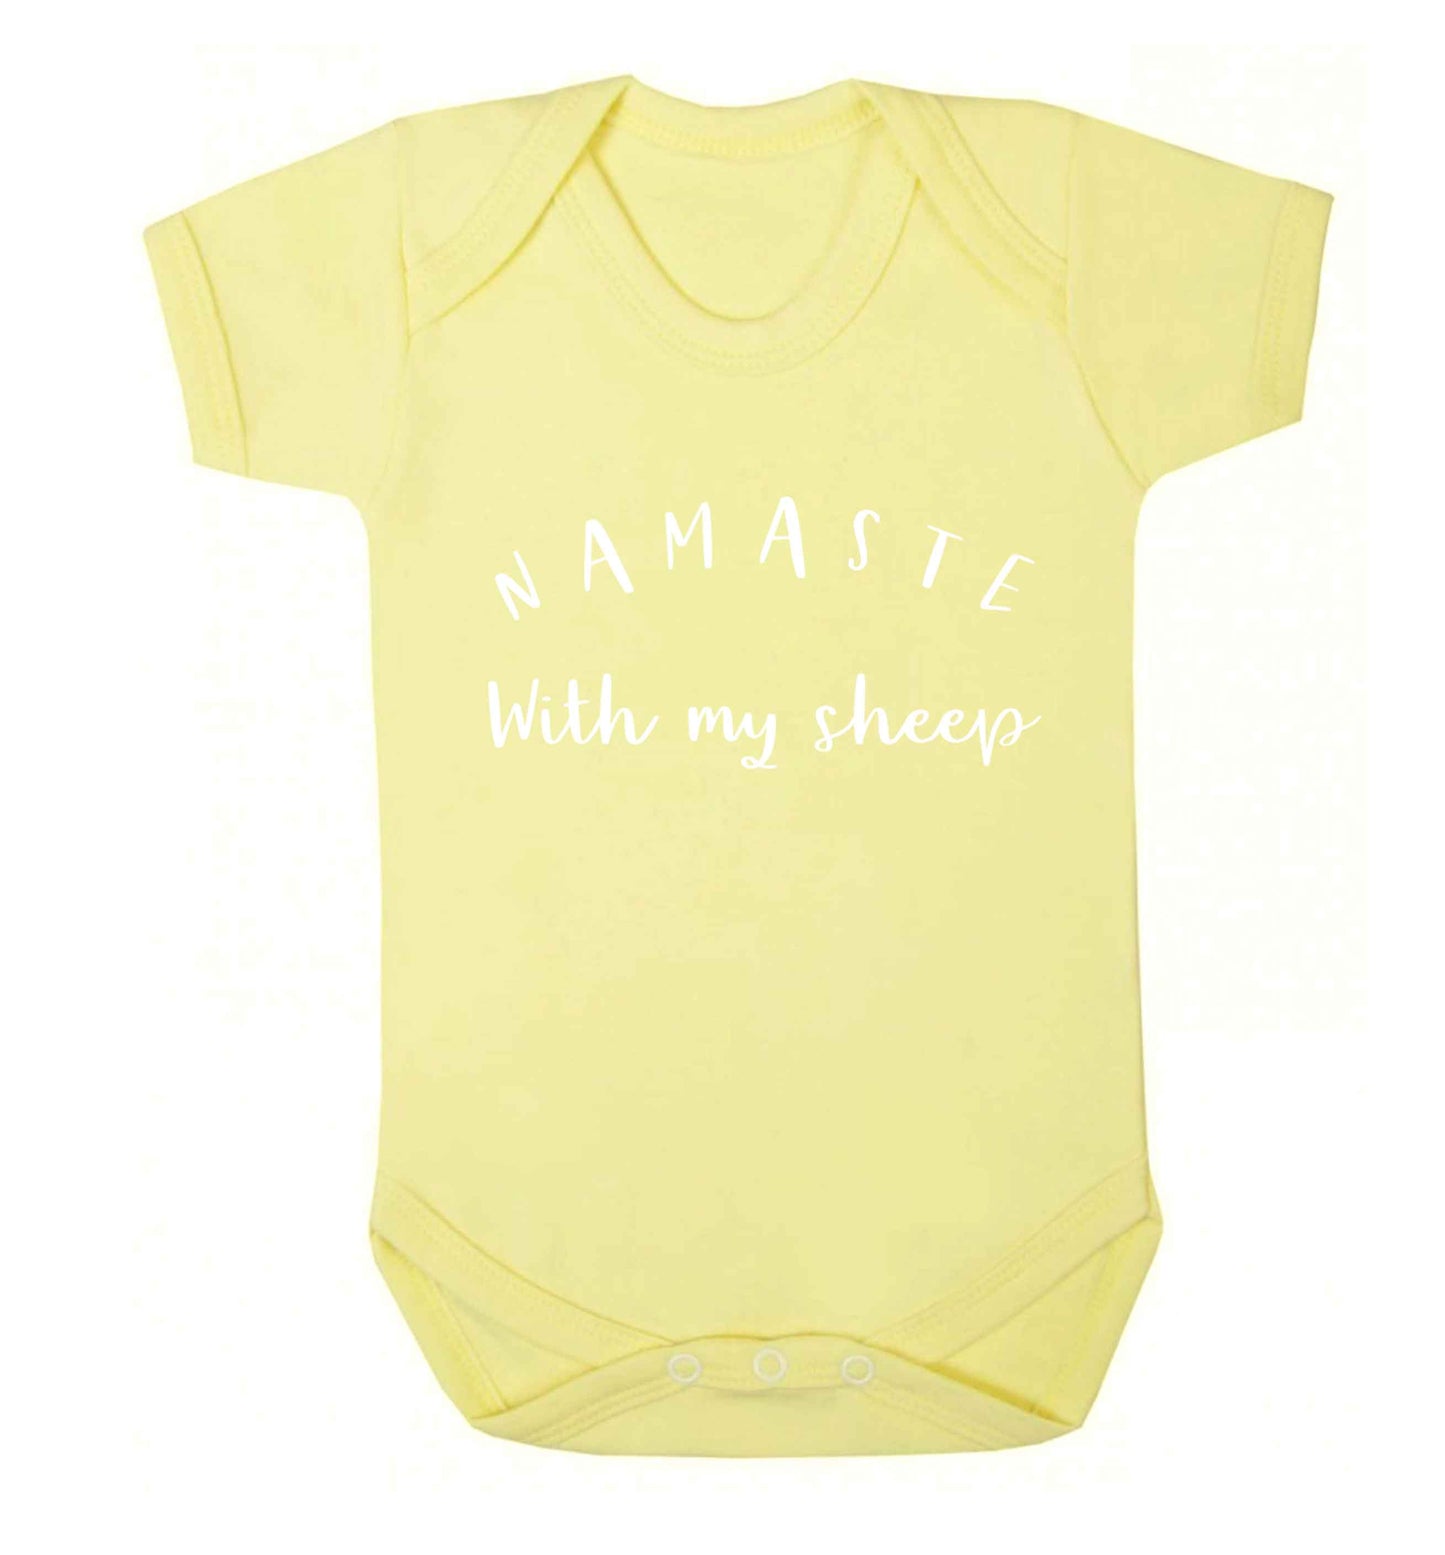 Namaste with my sheep Baby Vest pale yellow 18-24 months